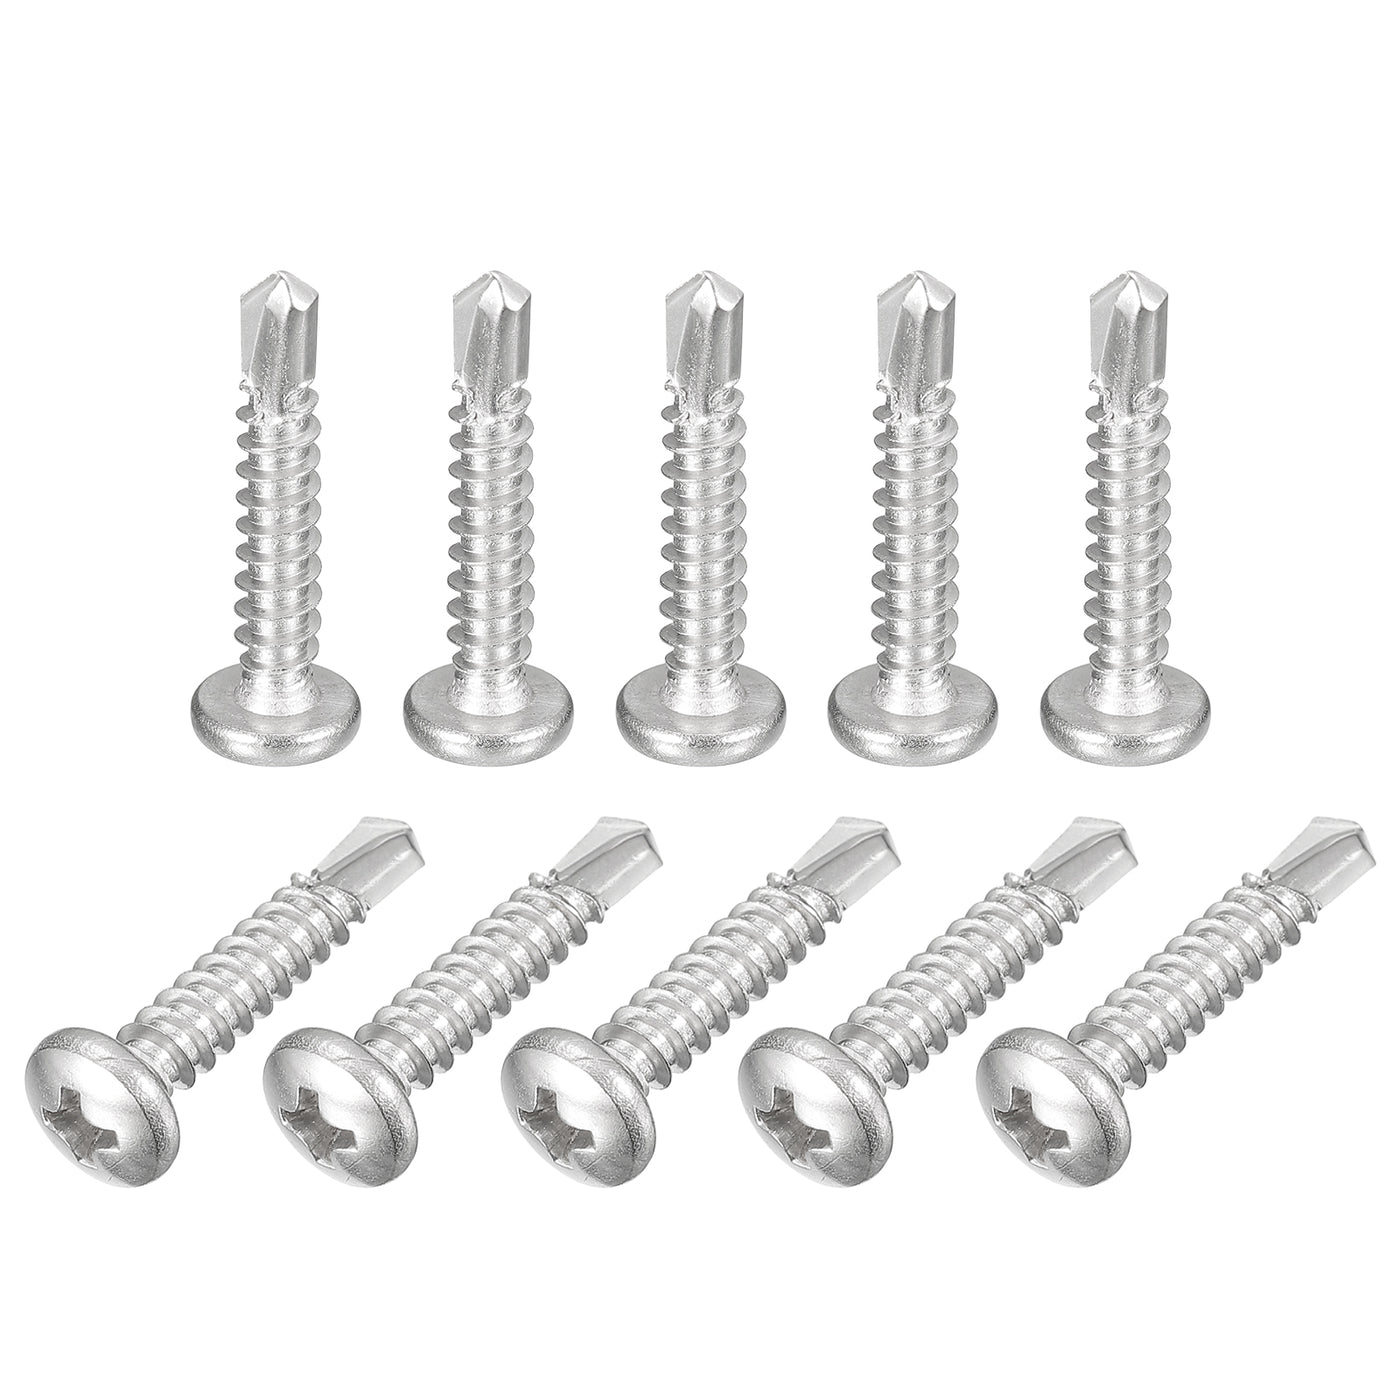 uxcell Uxcell #10 x 1" Self Drilling Screws, 50pcs Phillips Pan Head Self Tapping Screws